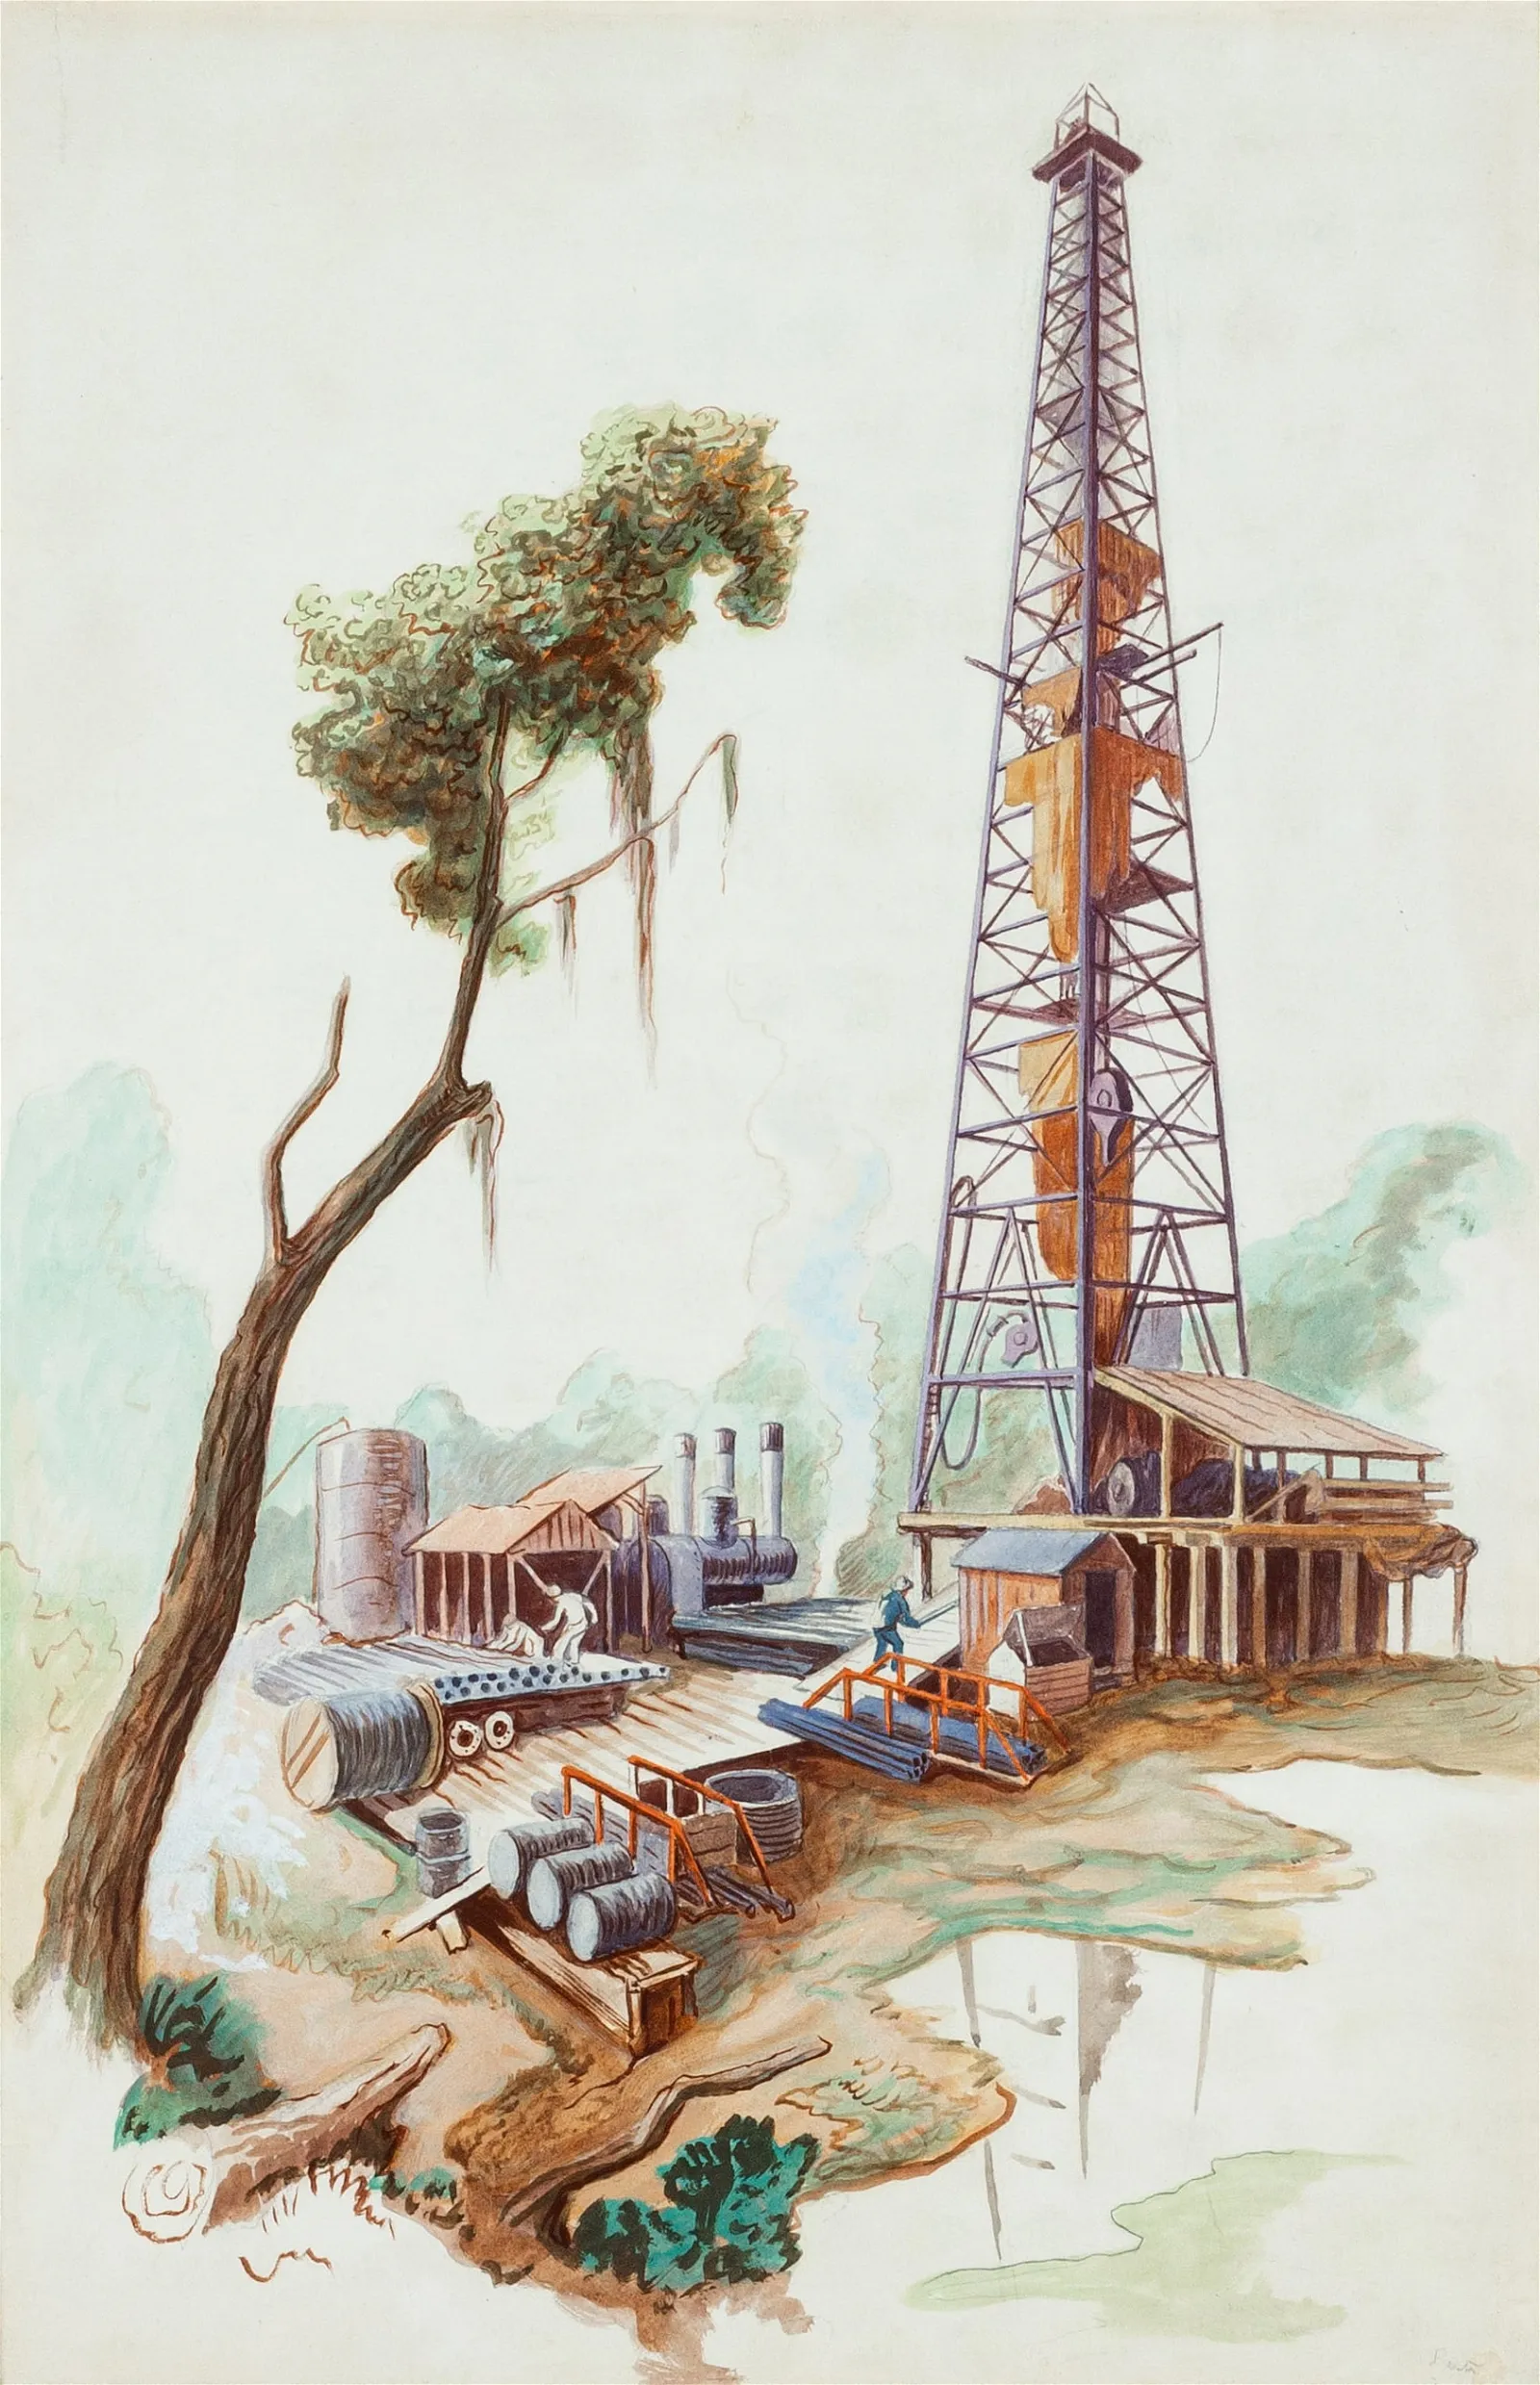 Thomas Hart Benton, Oil Well, $50,000-$80,000 at Cottone Auctions.